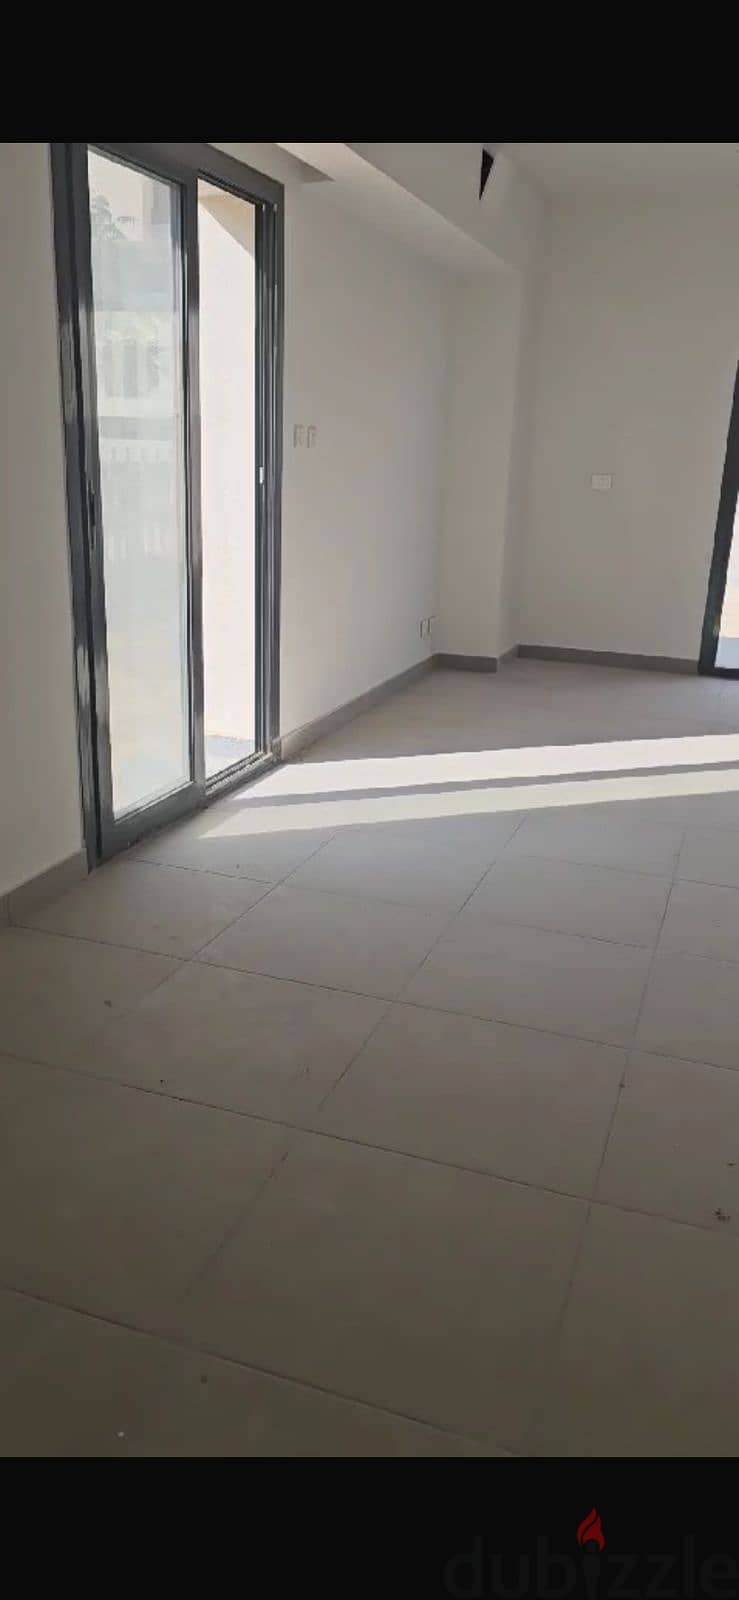 Duplex 175 sqm, immediate receipt, fully finished, next to the International Medical Center in Shorouk City, Al Burouj Compound 5